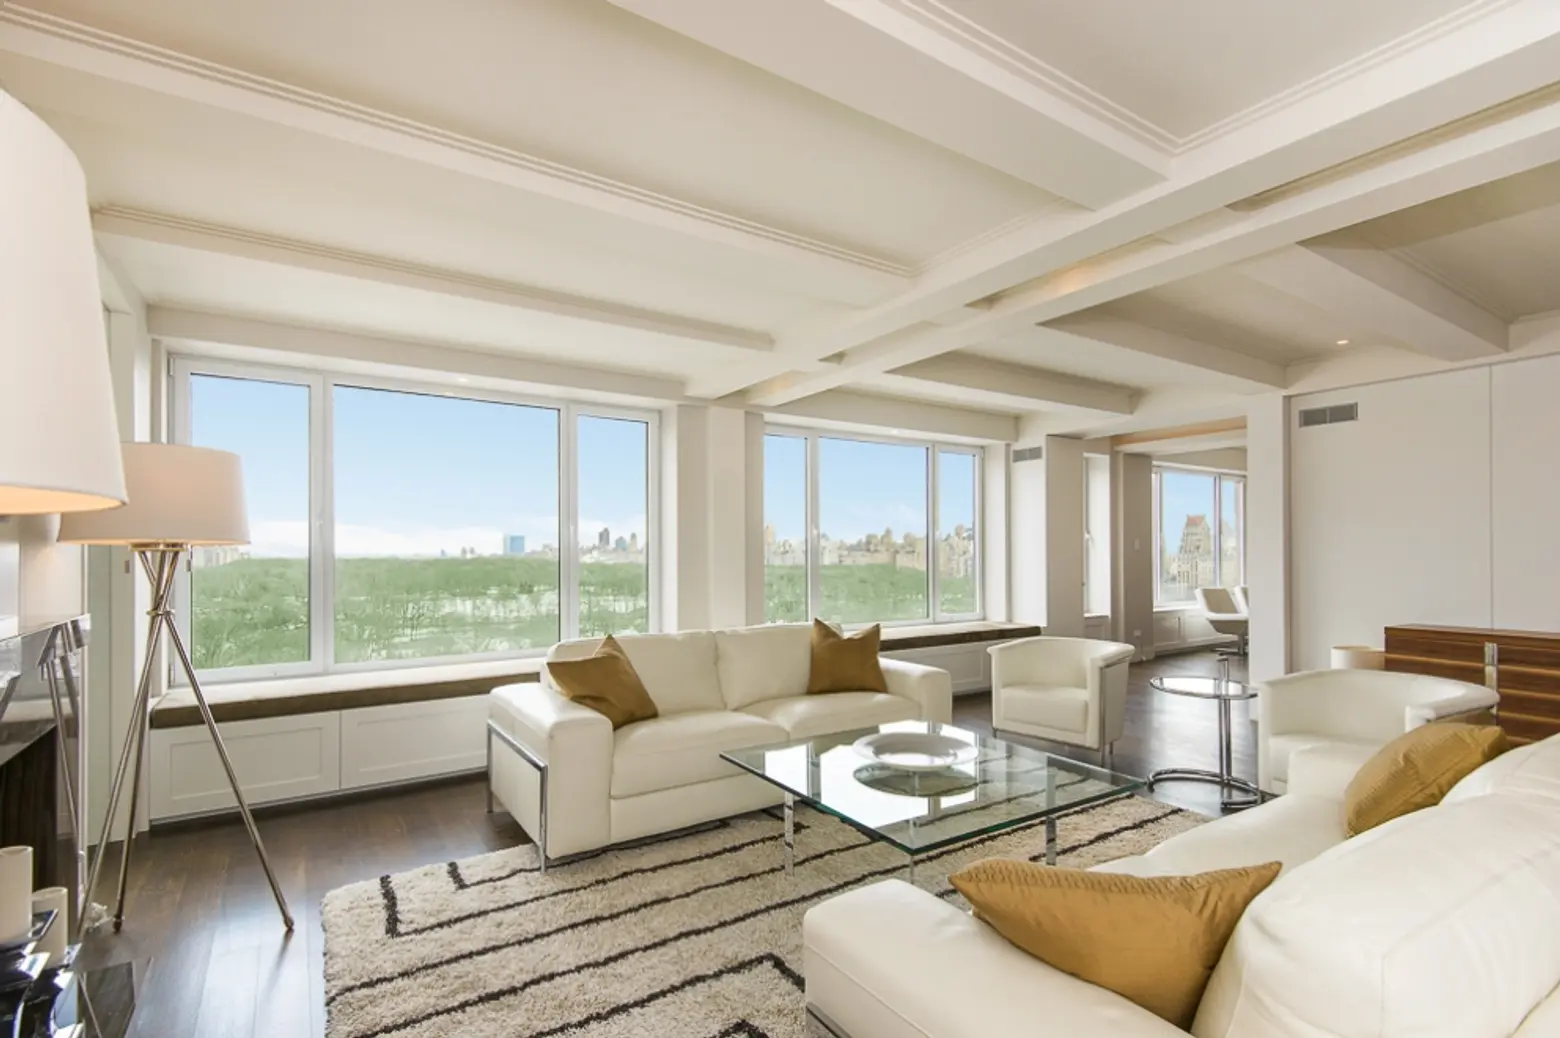 Parkview Developers Ian Reisner and Mati Weiderpass Sell Southmoor House Penthouse for $11.9 Million